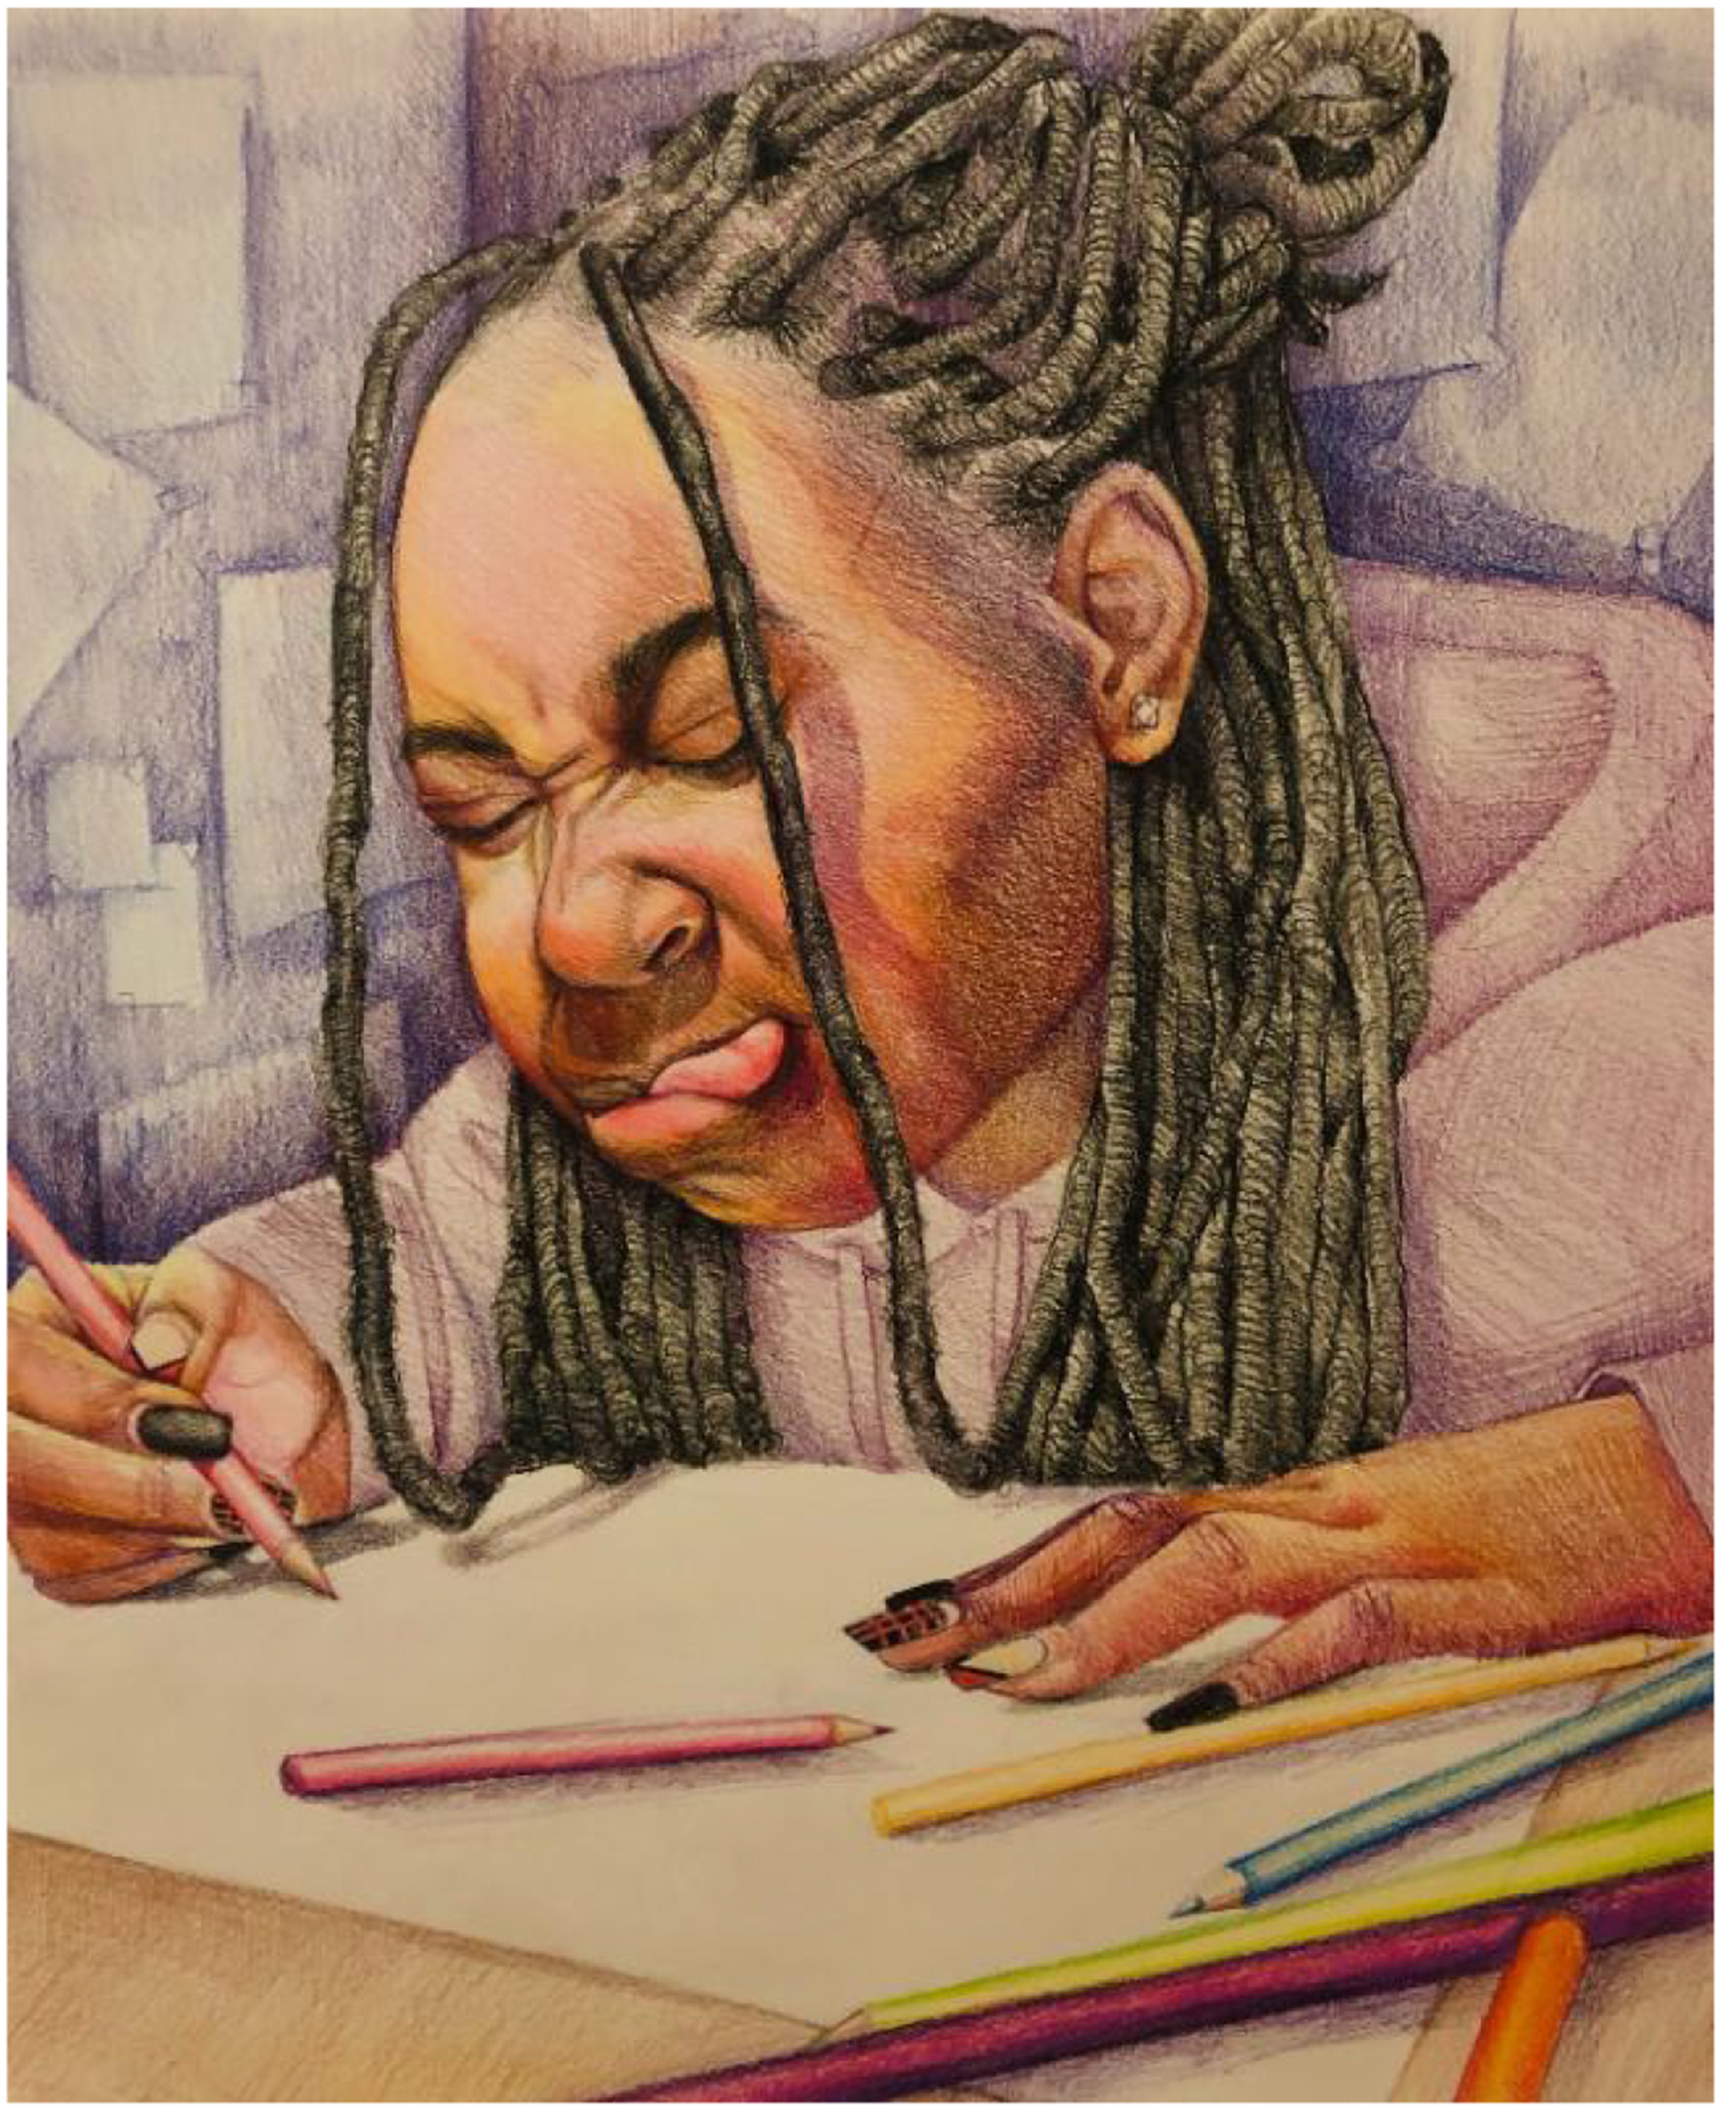 Illustration of a young black woman scrunching up her face as she takes a test at a desk